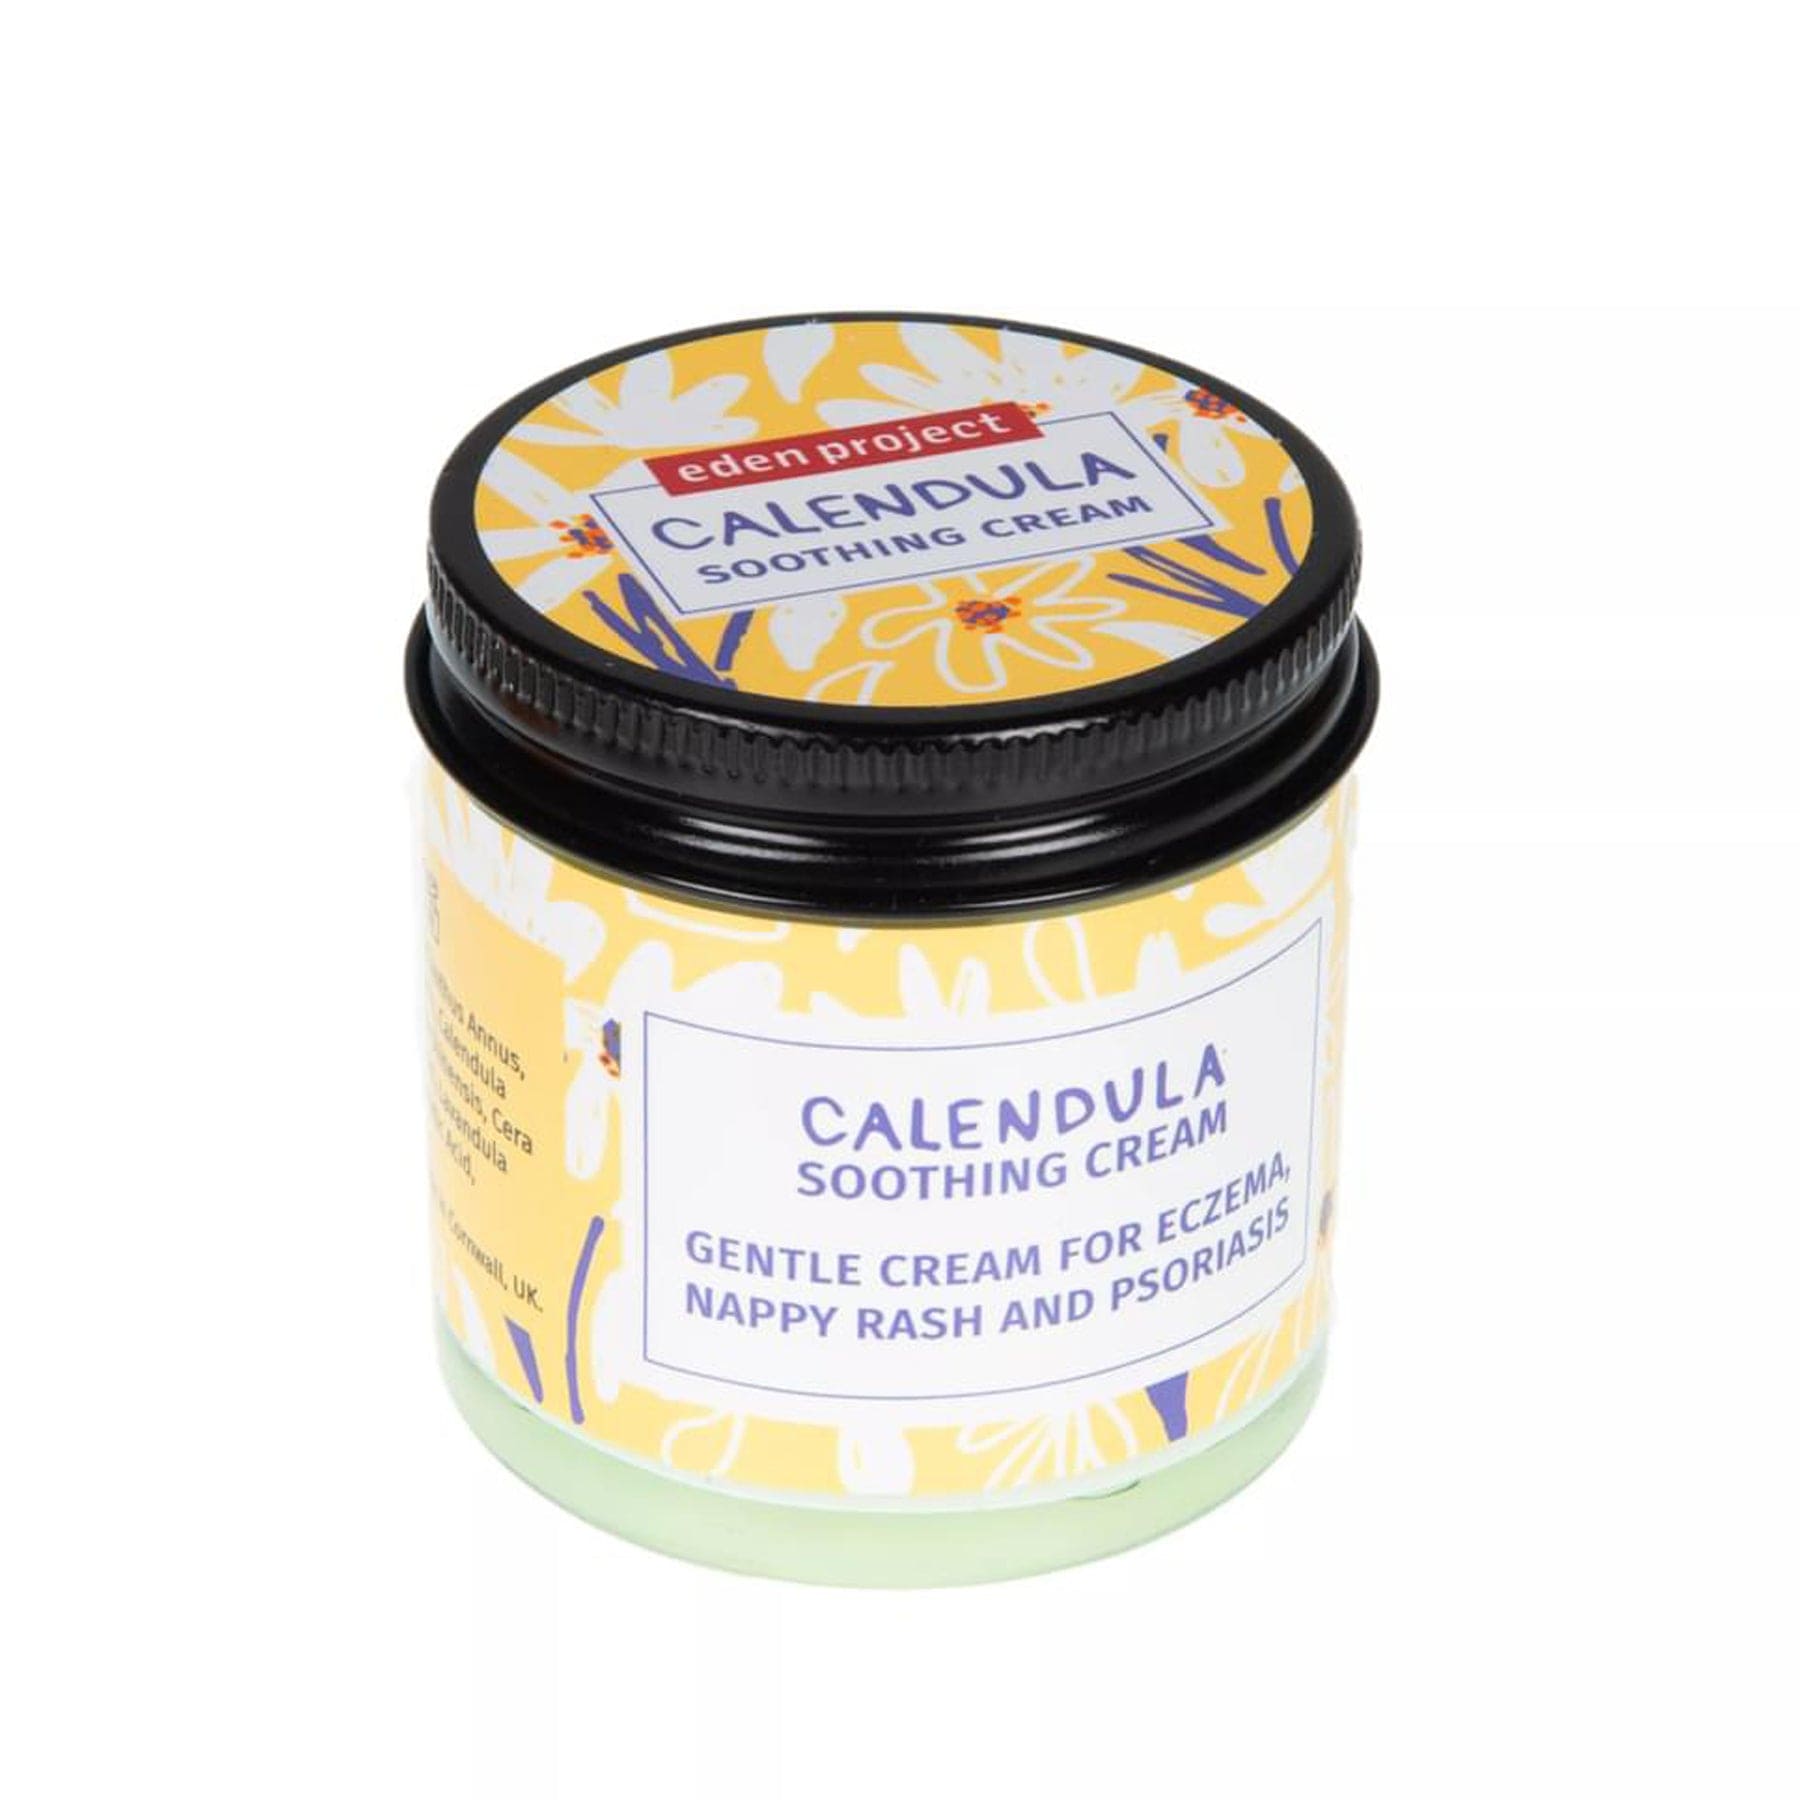 Eden Project Calendula Soothing Cream jar for eczema, nappy rash, and psoriasis with yellow and white floral design on label, isolated on white background.